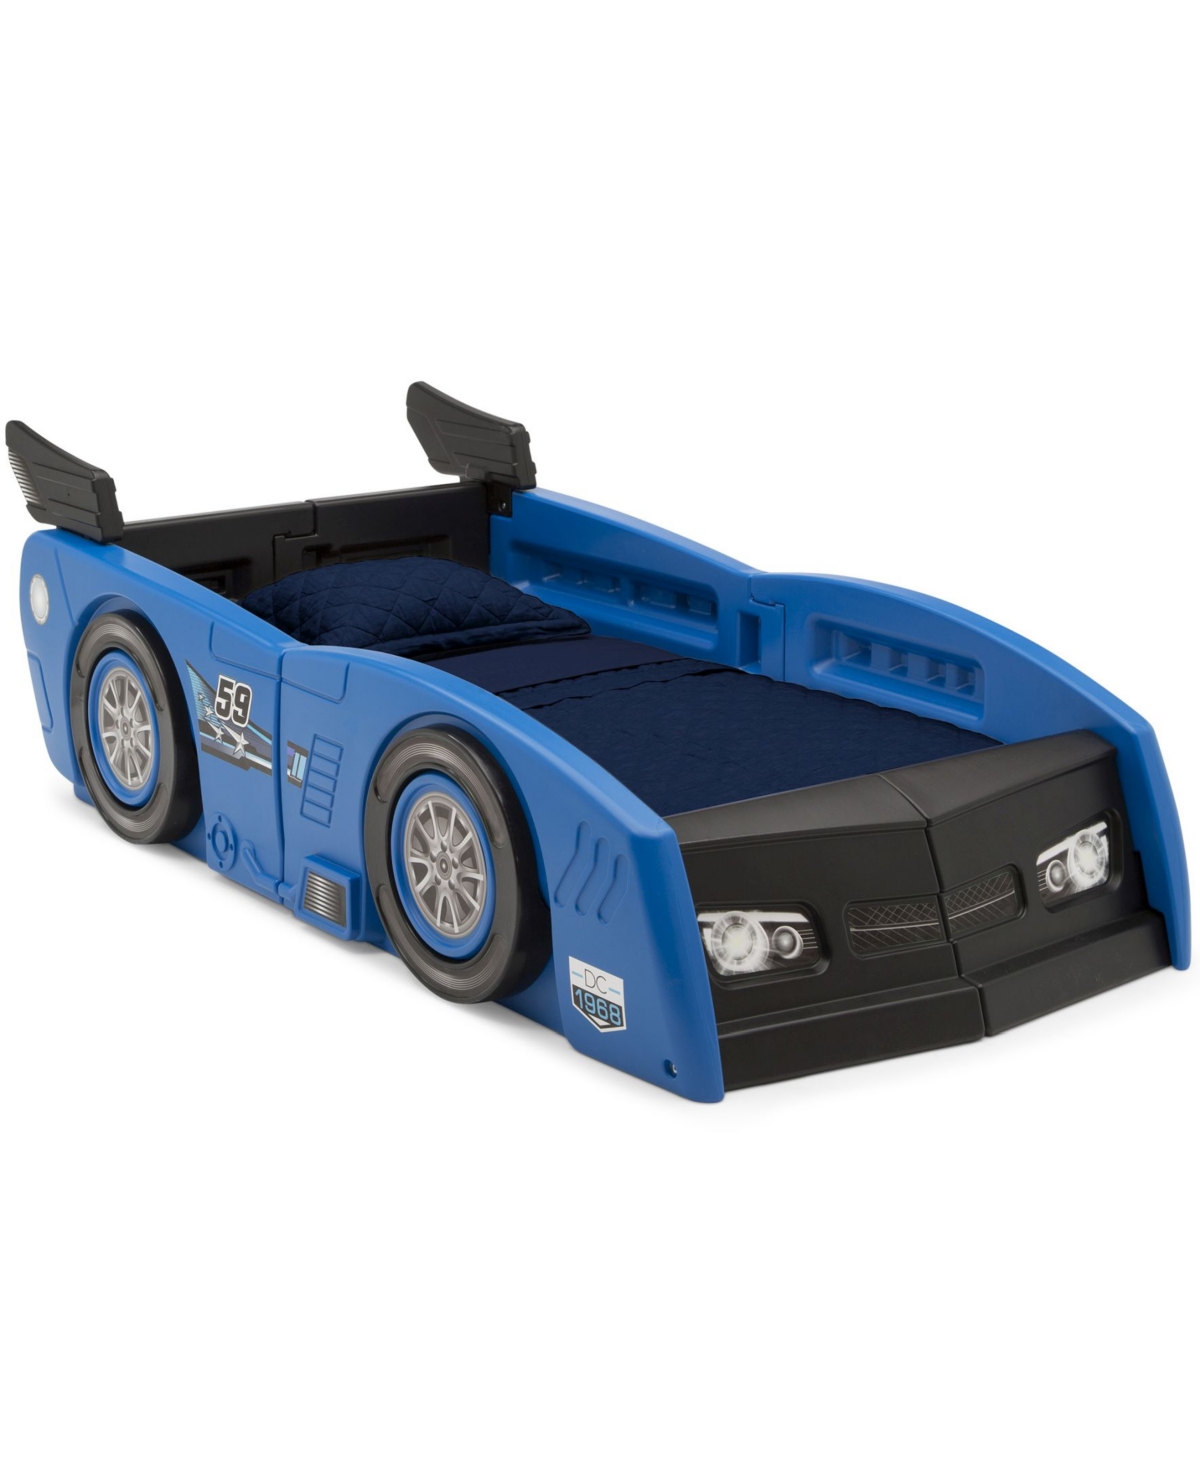 Delta Children Grand Prix Race Car Toddler and Twin Bed